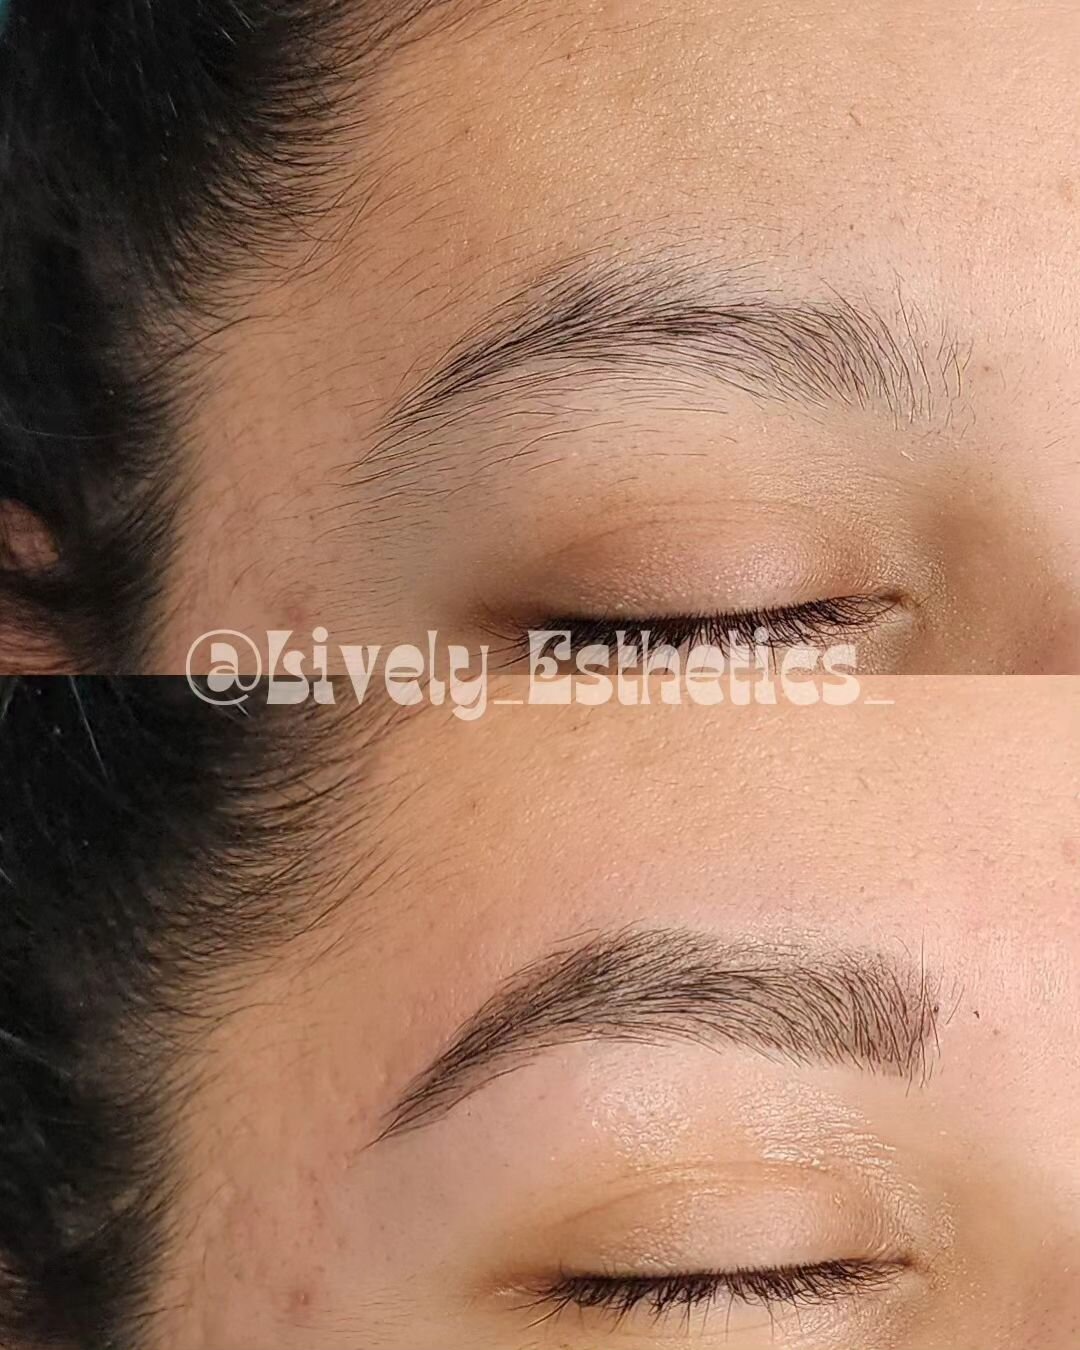 Don't mind me, I'm just gushing over this transformation! 
 
Eyebrow sculpting for the win!!